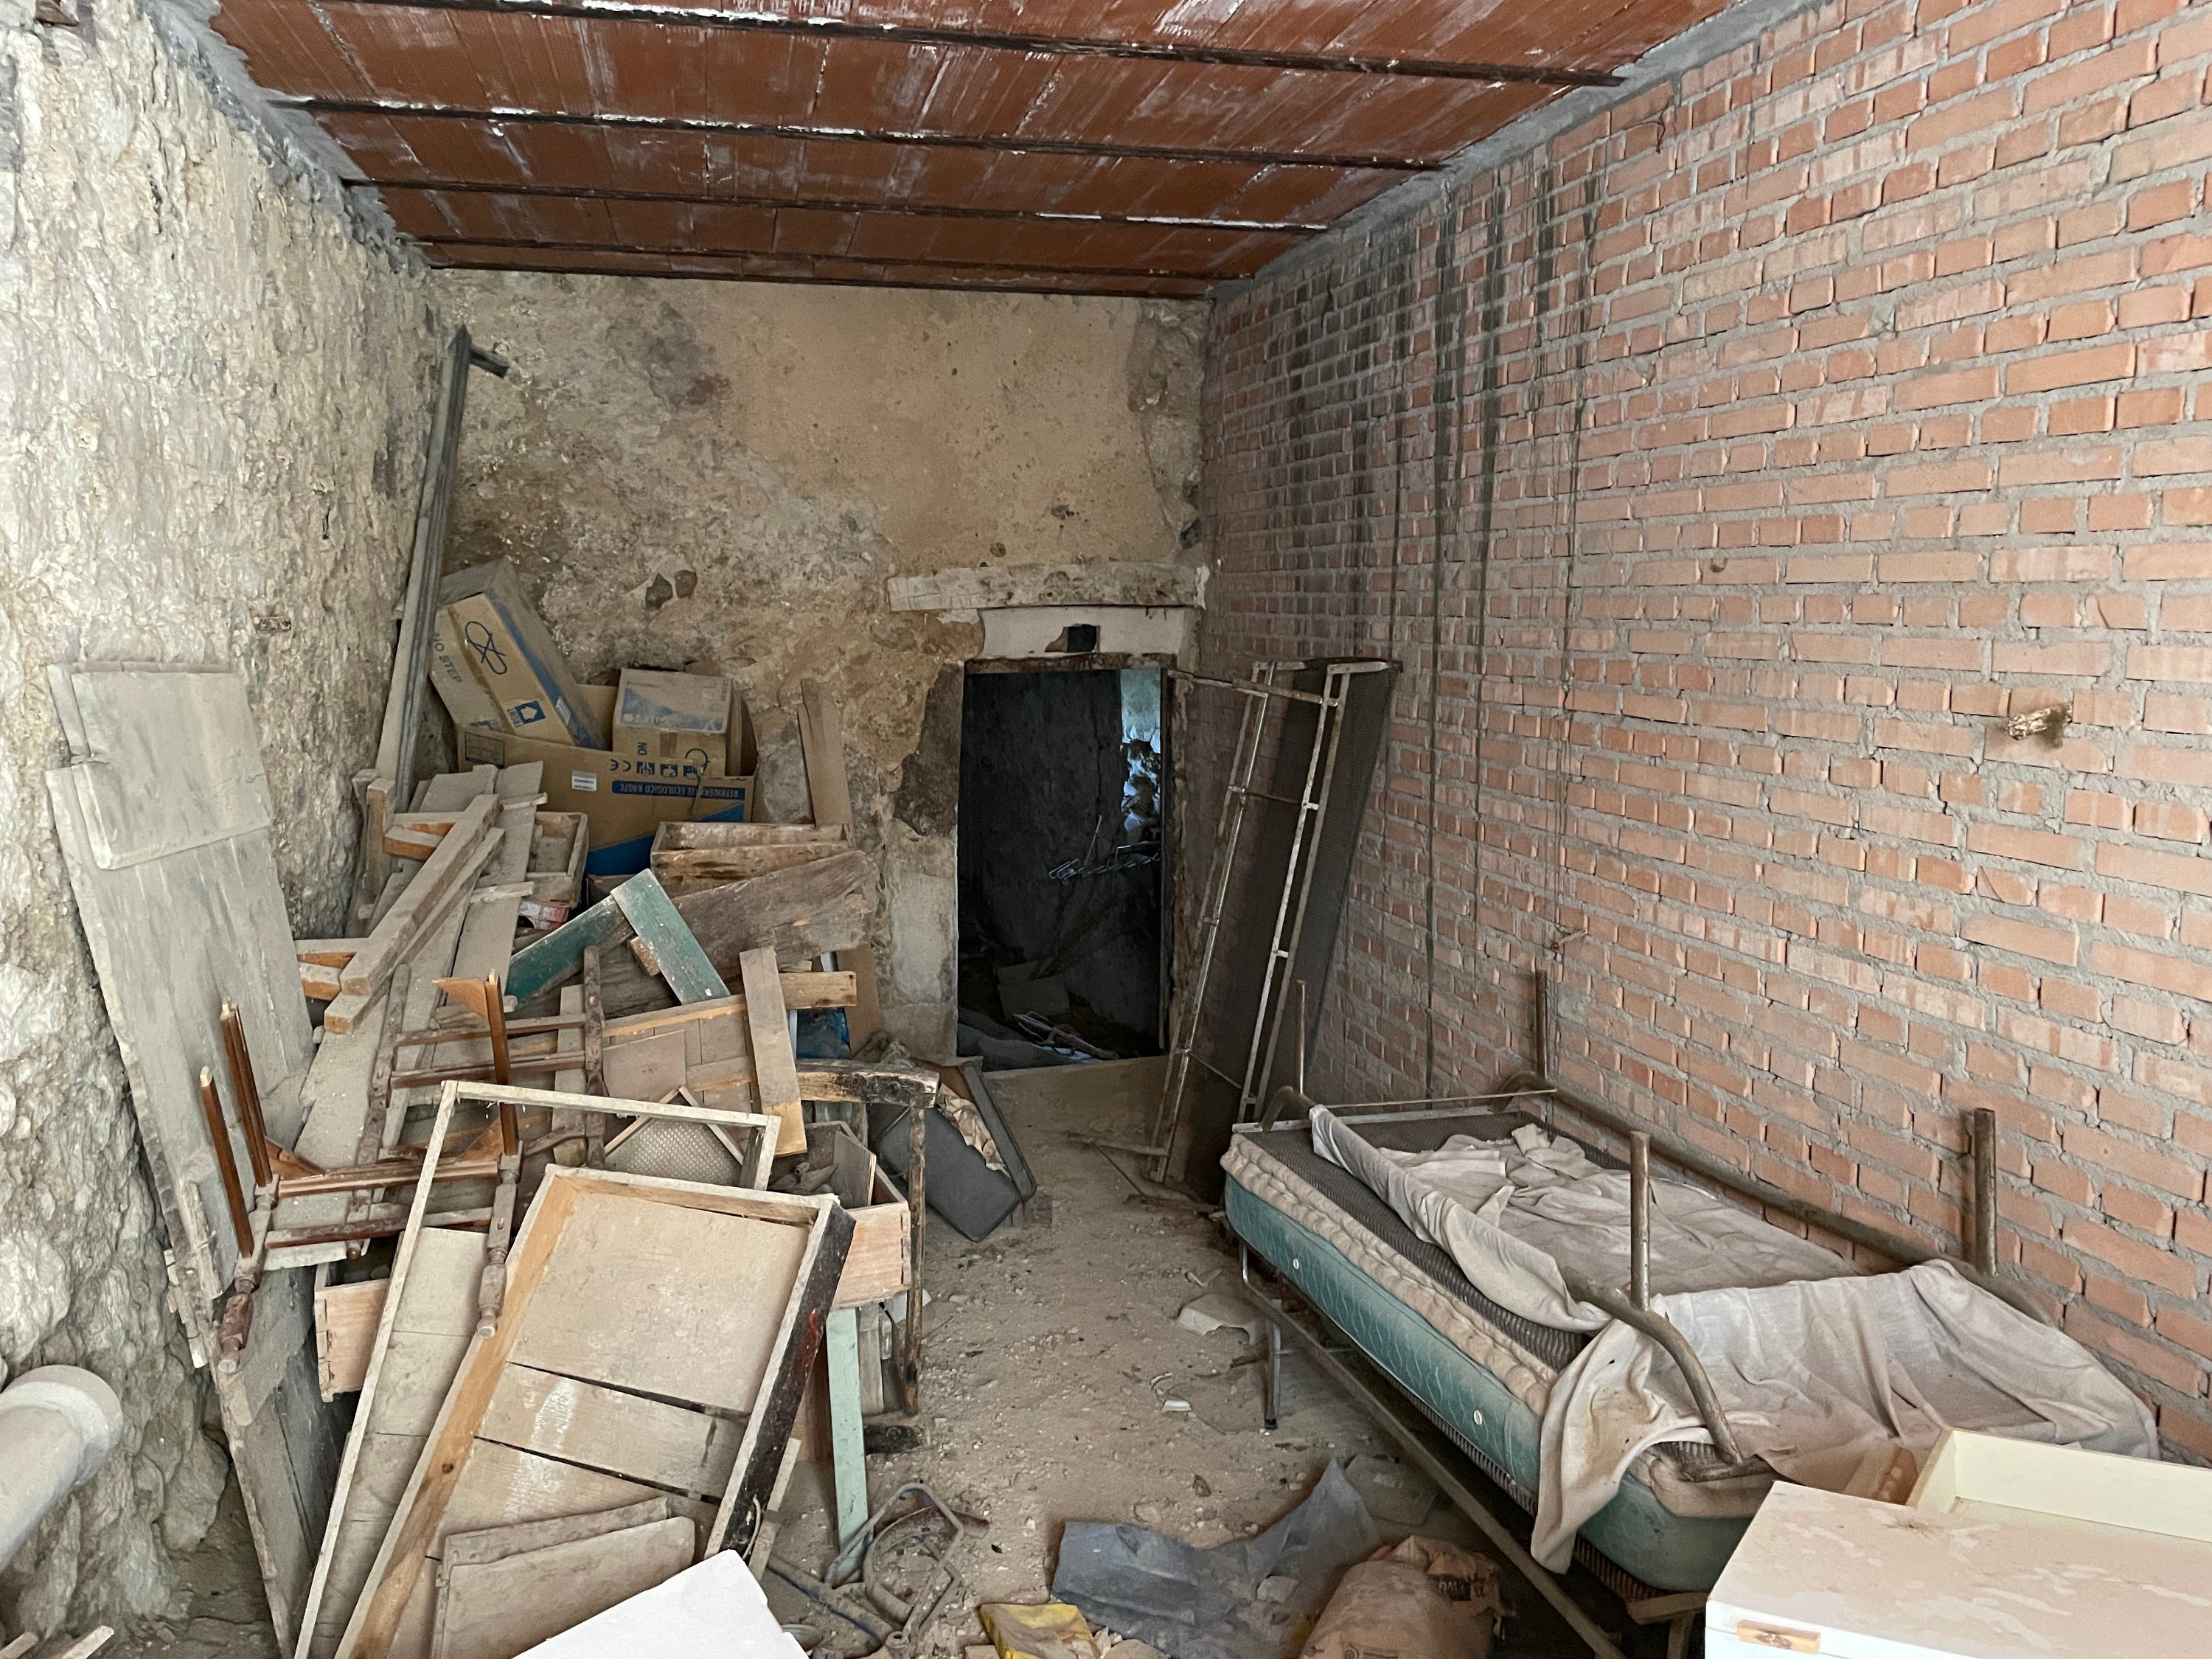 Some of the village's abandoned homes are in disrepair